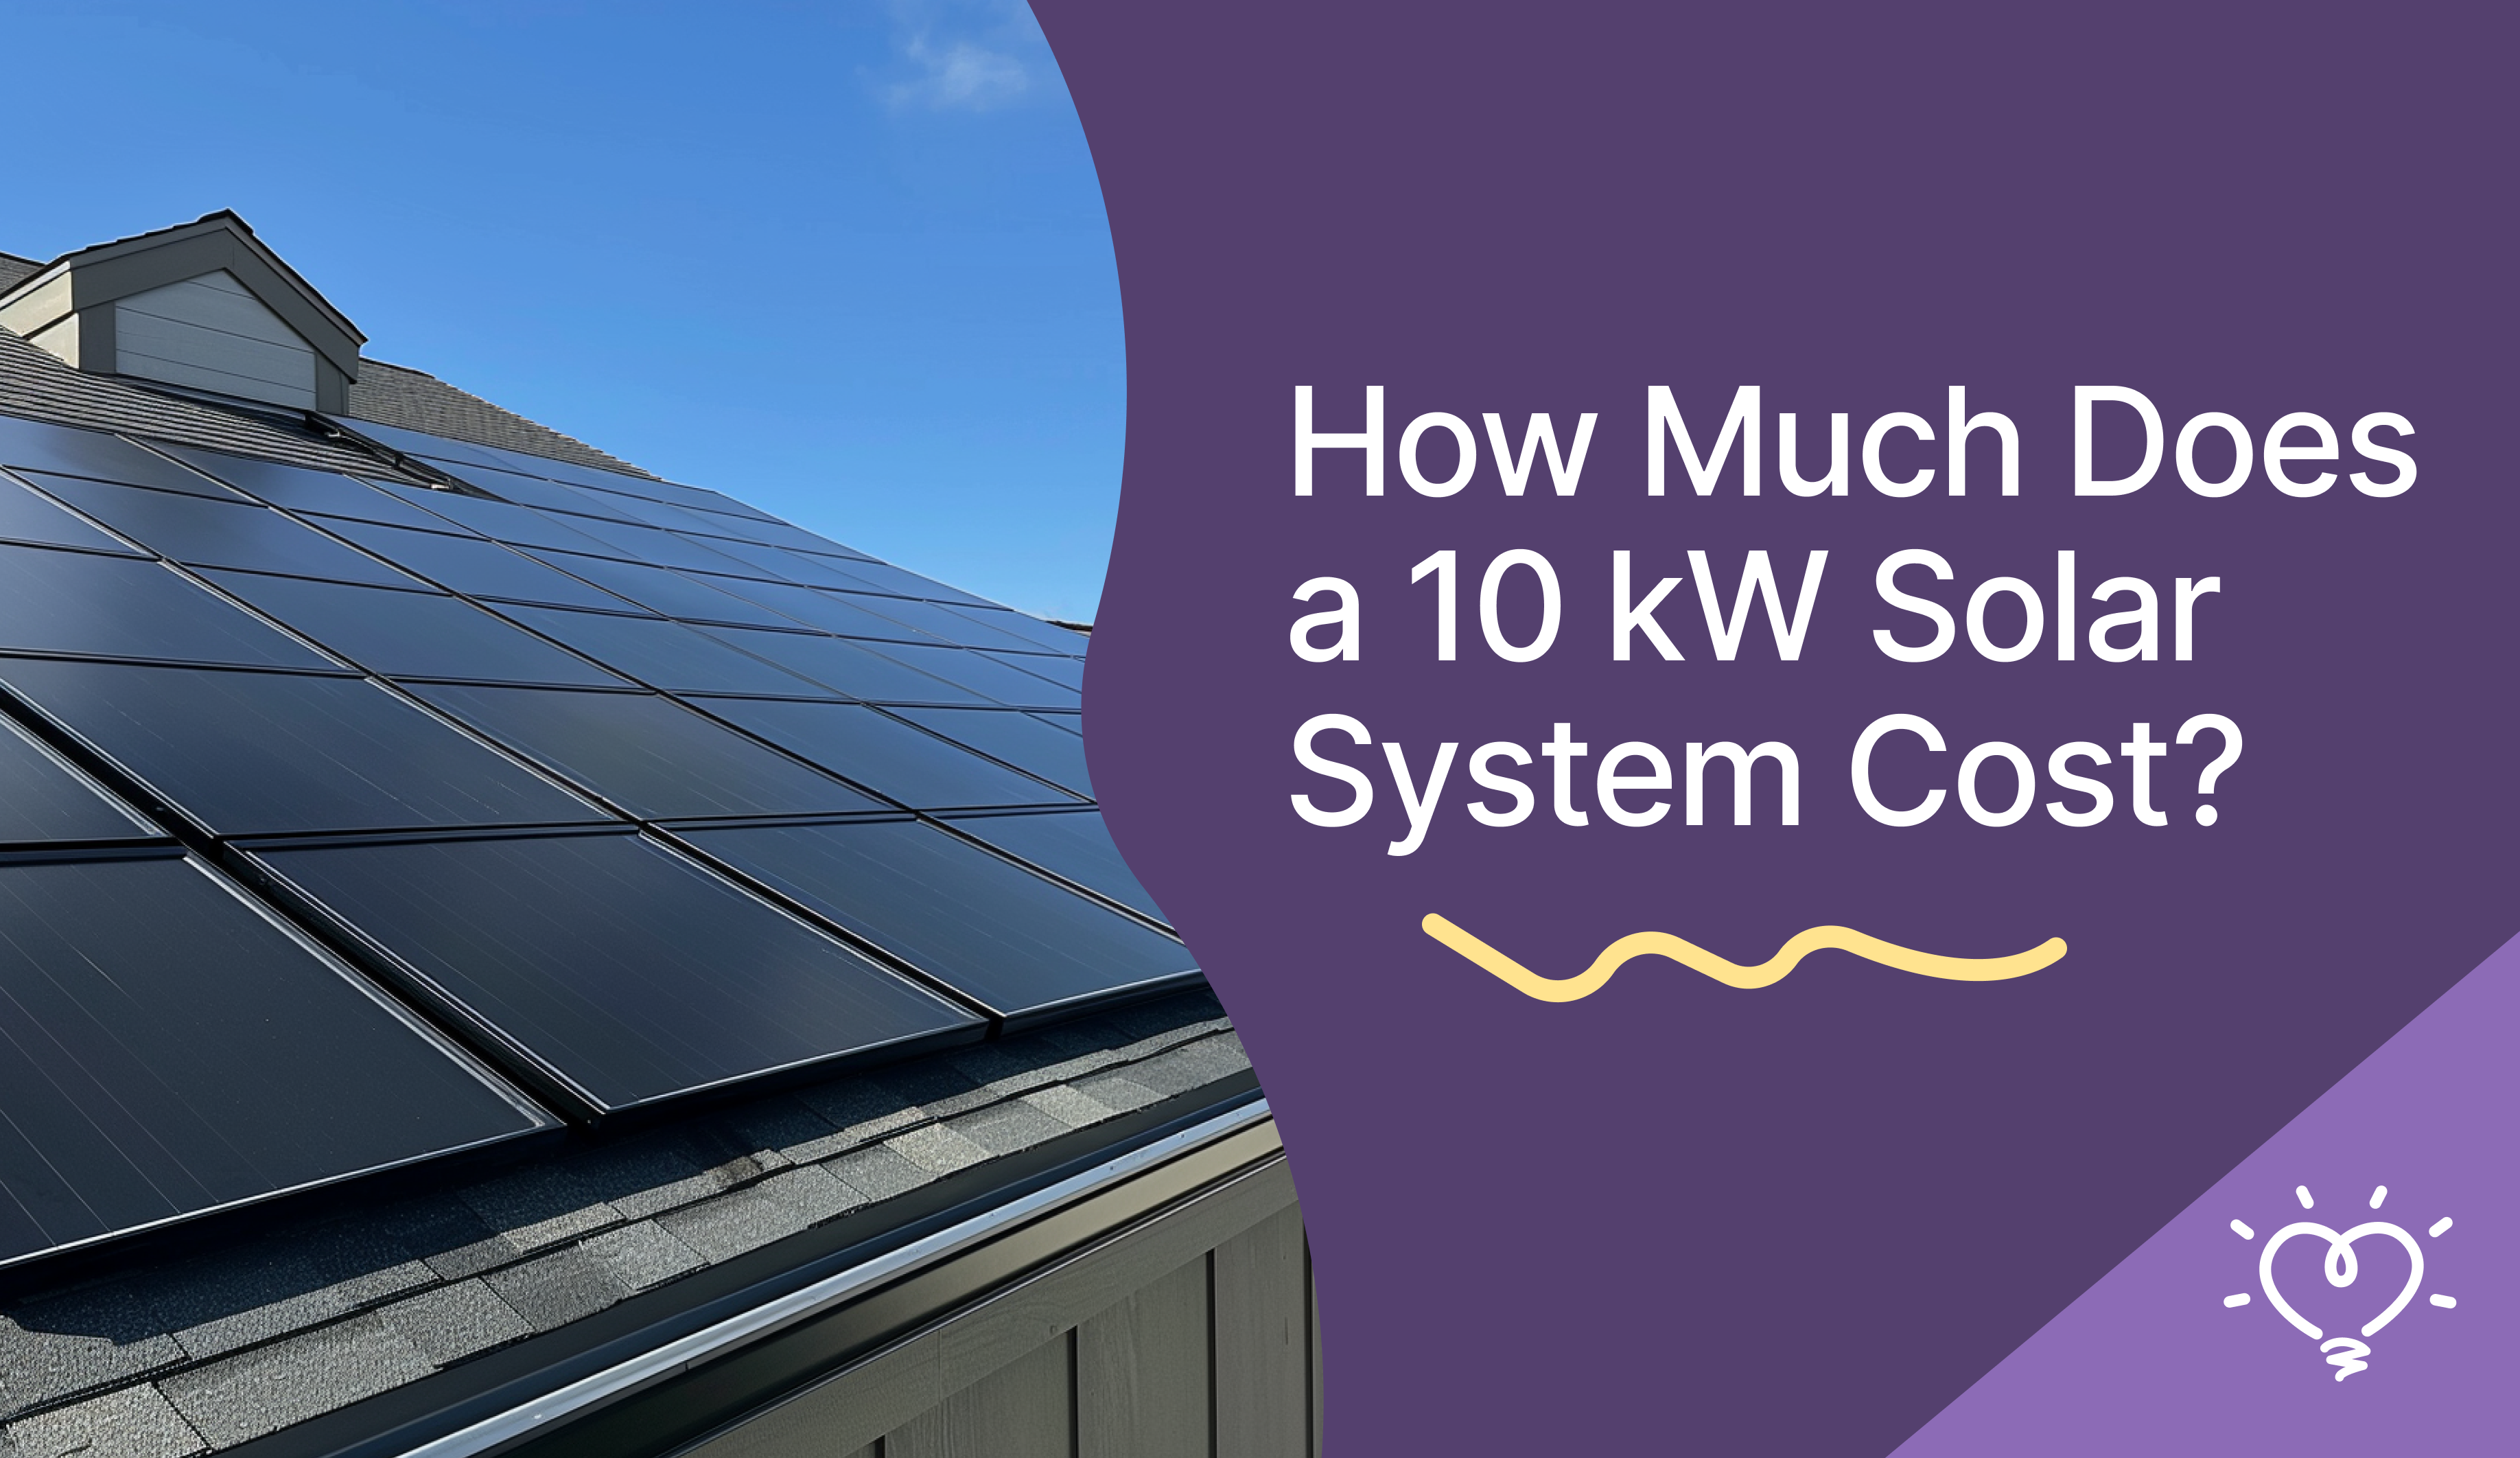 How Much Does a 10 kW Solar System Cost?